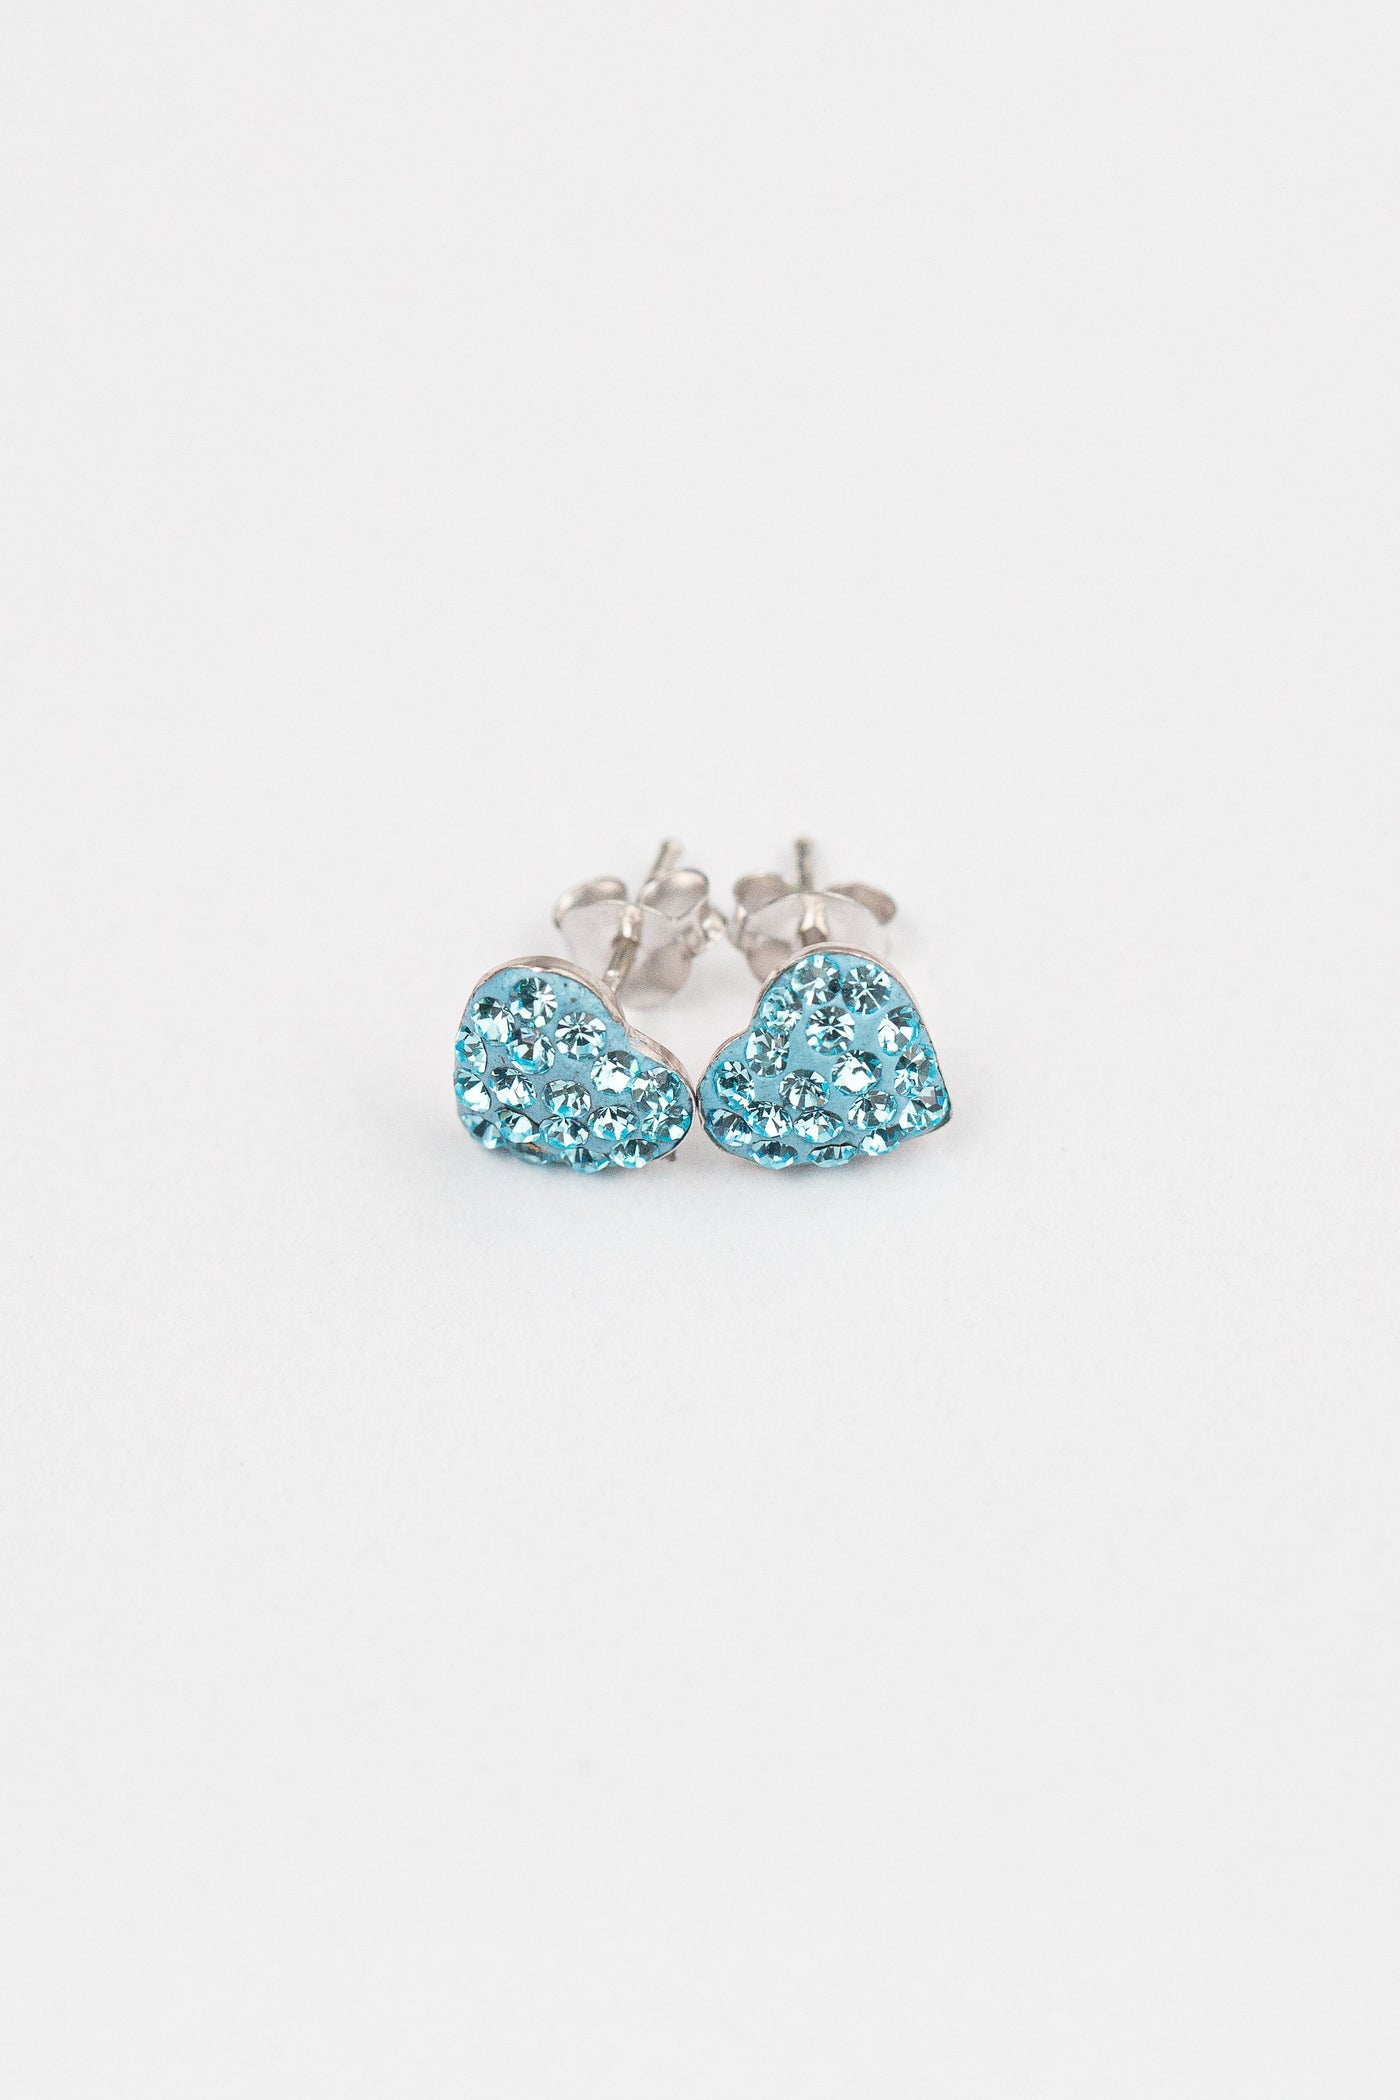 Heart Pave Crystal Silver Stud Earrings in Aquamarine | Annie and Sisters | sister stud earrings, for kids, children's jewelry, kid's jewelry, best friend